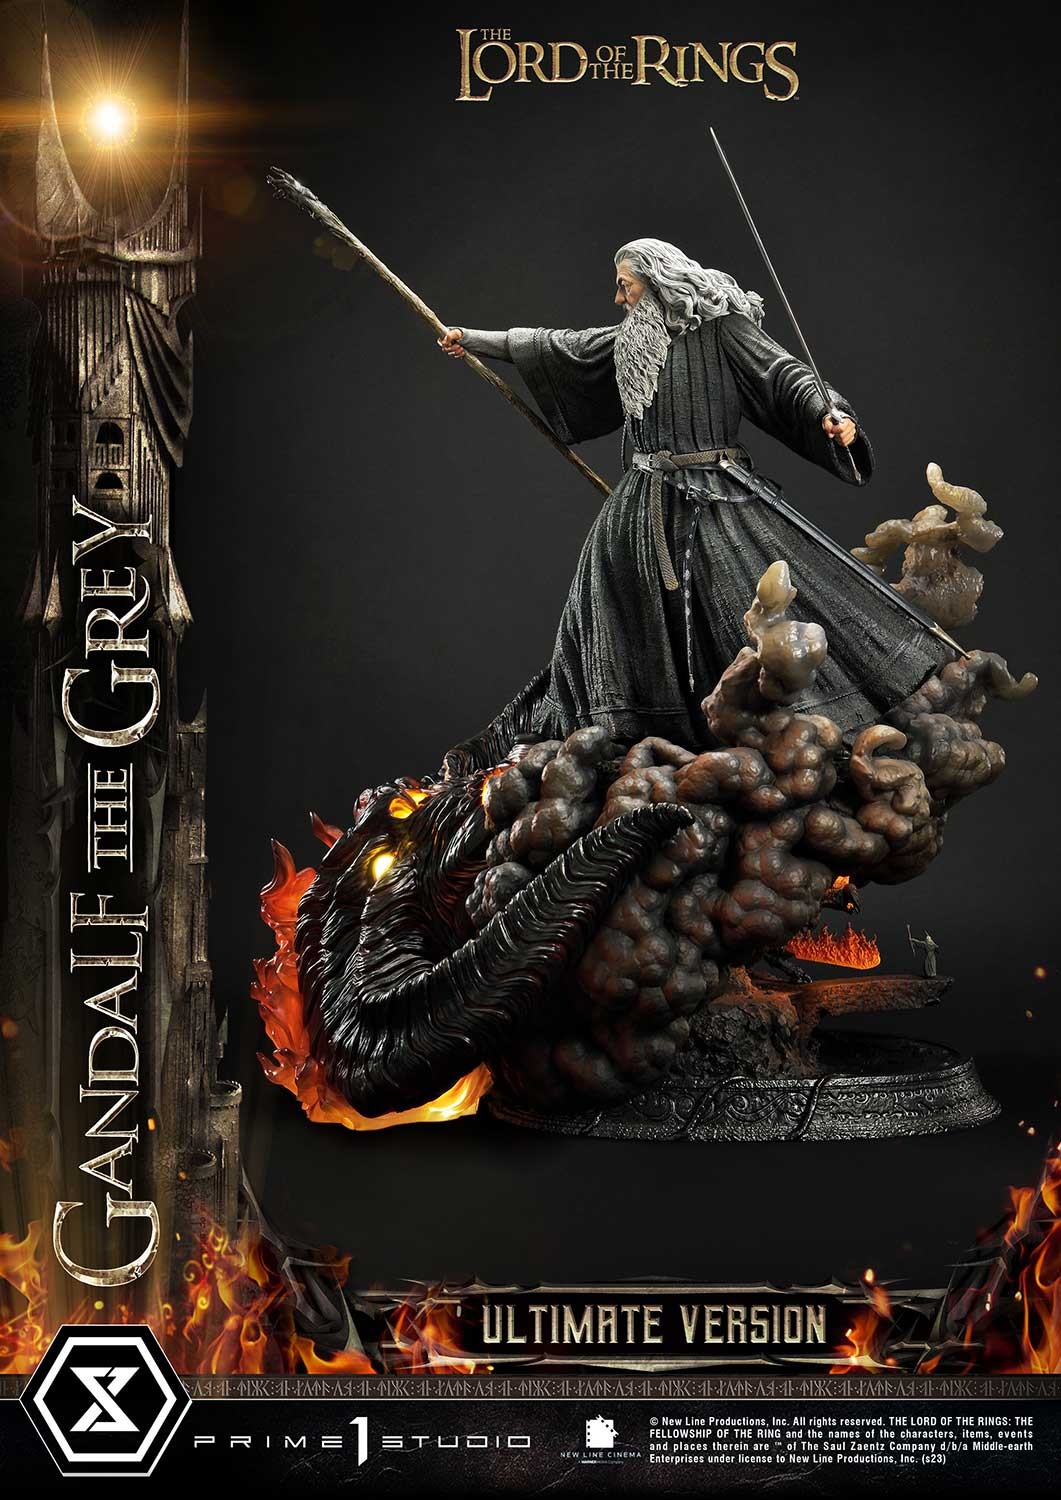 GANDALF THE GREY 1/4 Scale Statue Gandalf-the-grey-ultimate-version_the-lord-of-the-rings_gallery_64c425bca1e6f